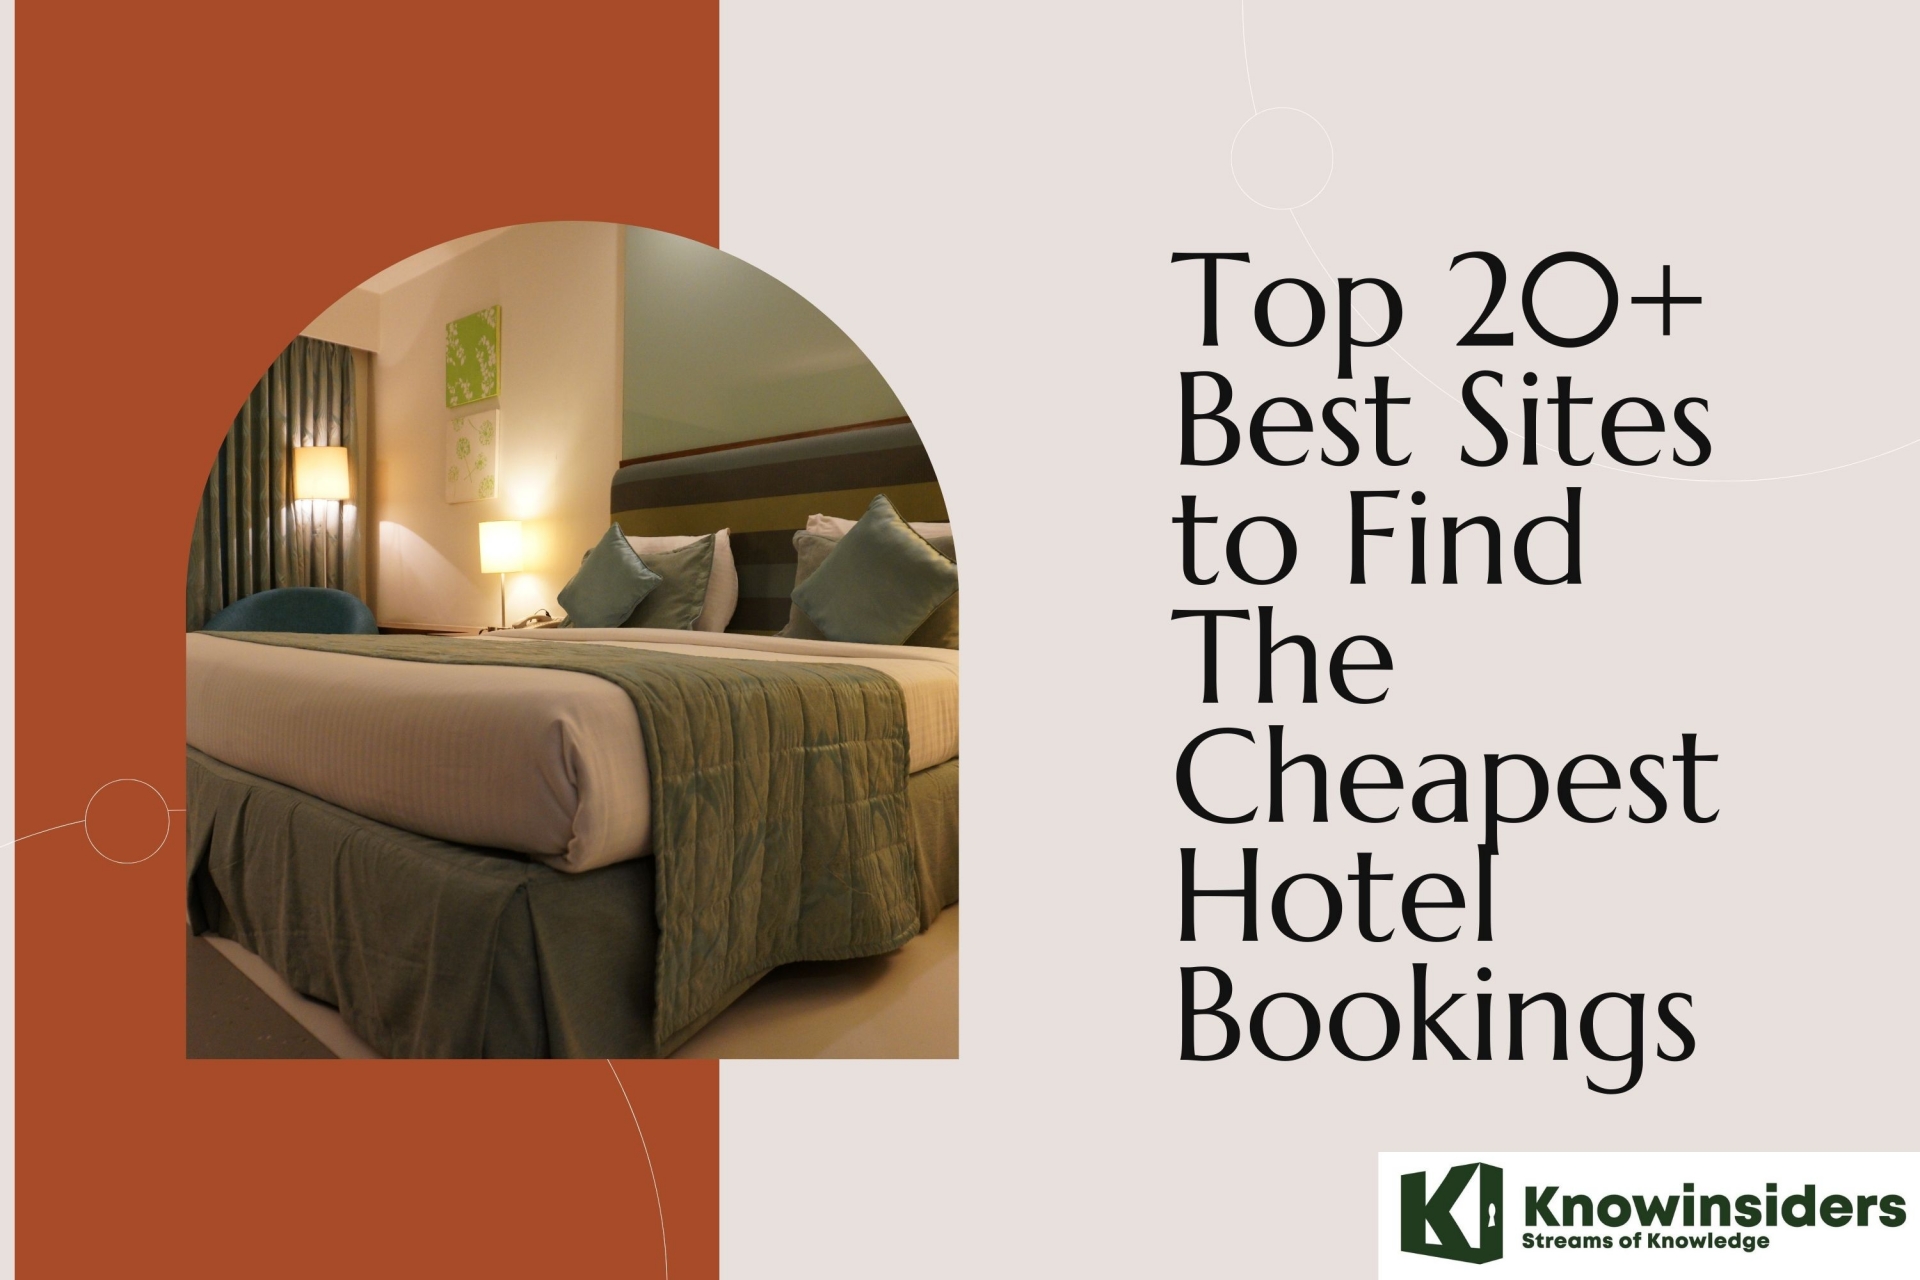 Top 20+ Best Sites to Find The Cheapest Hotel Bookings